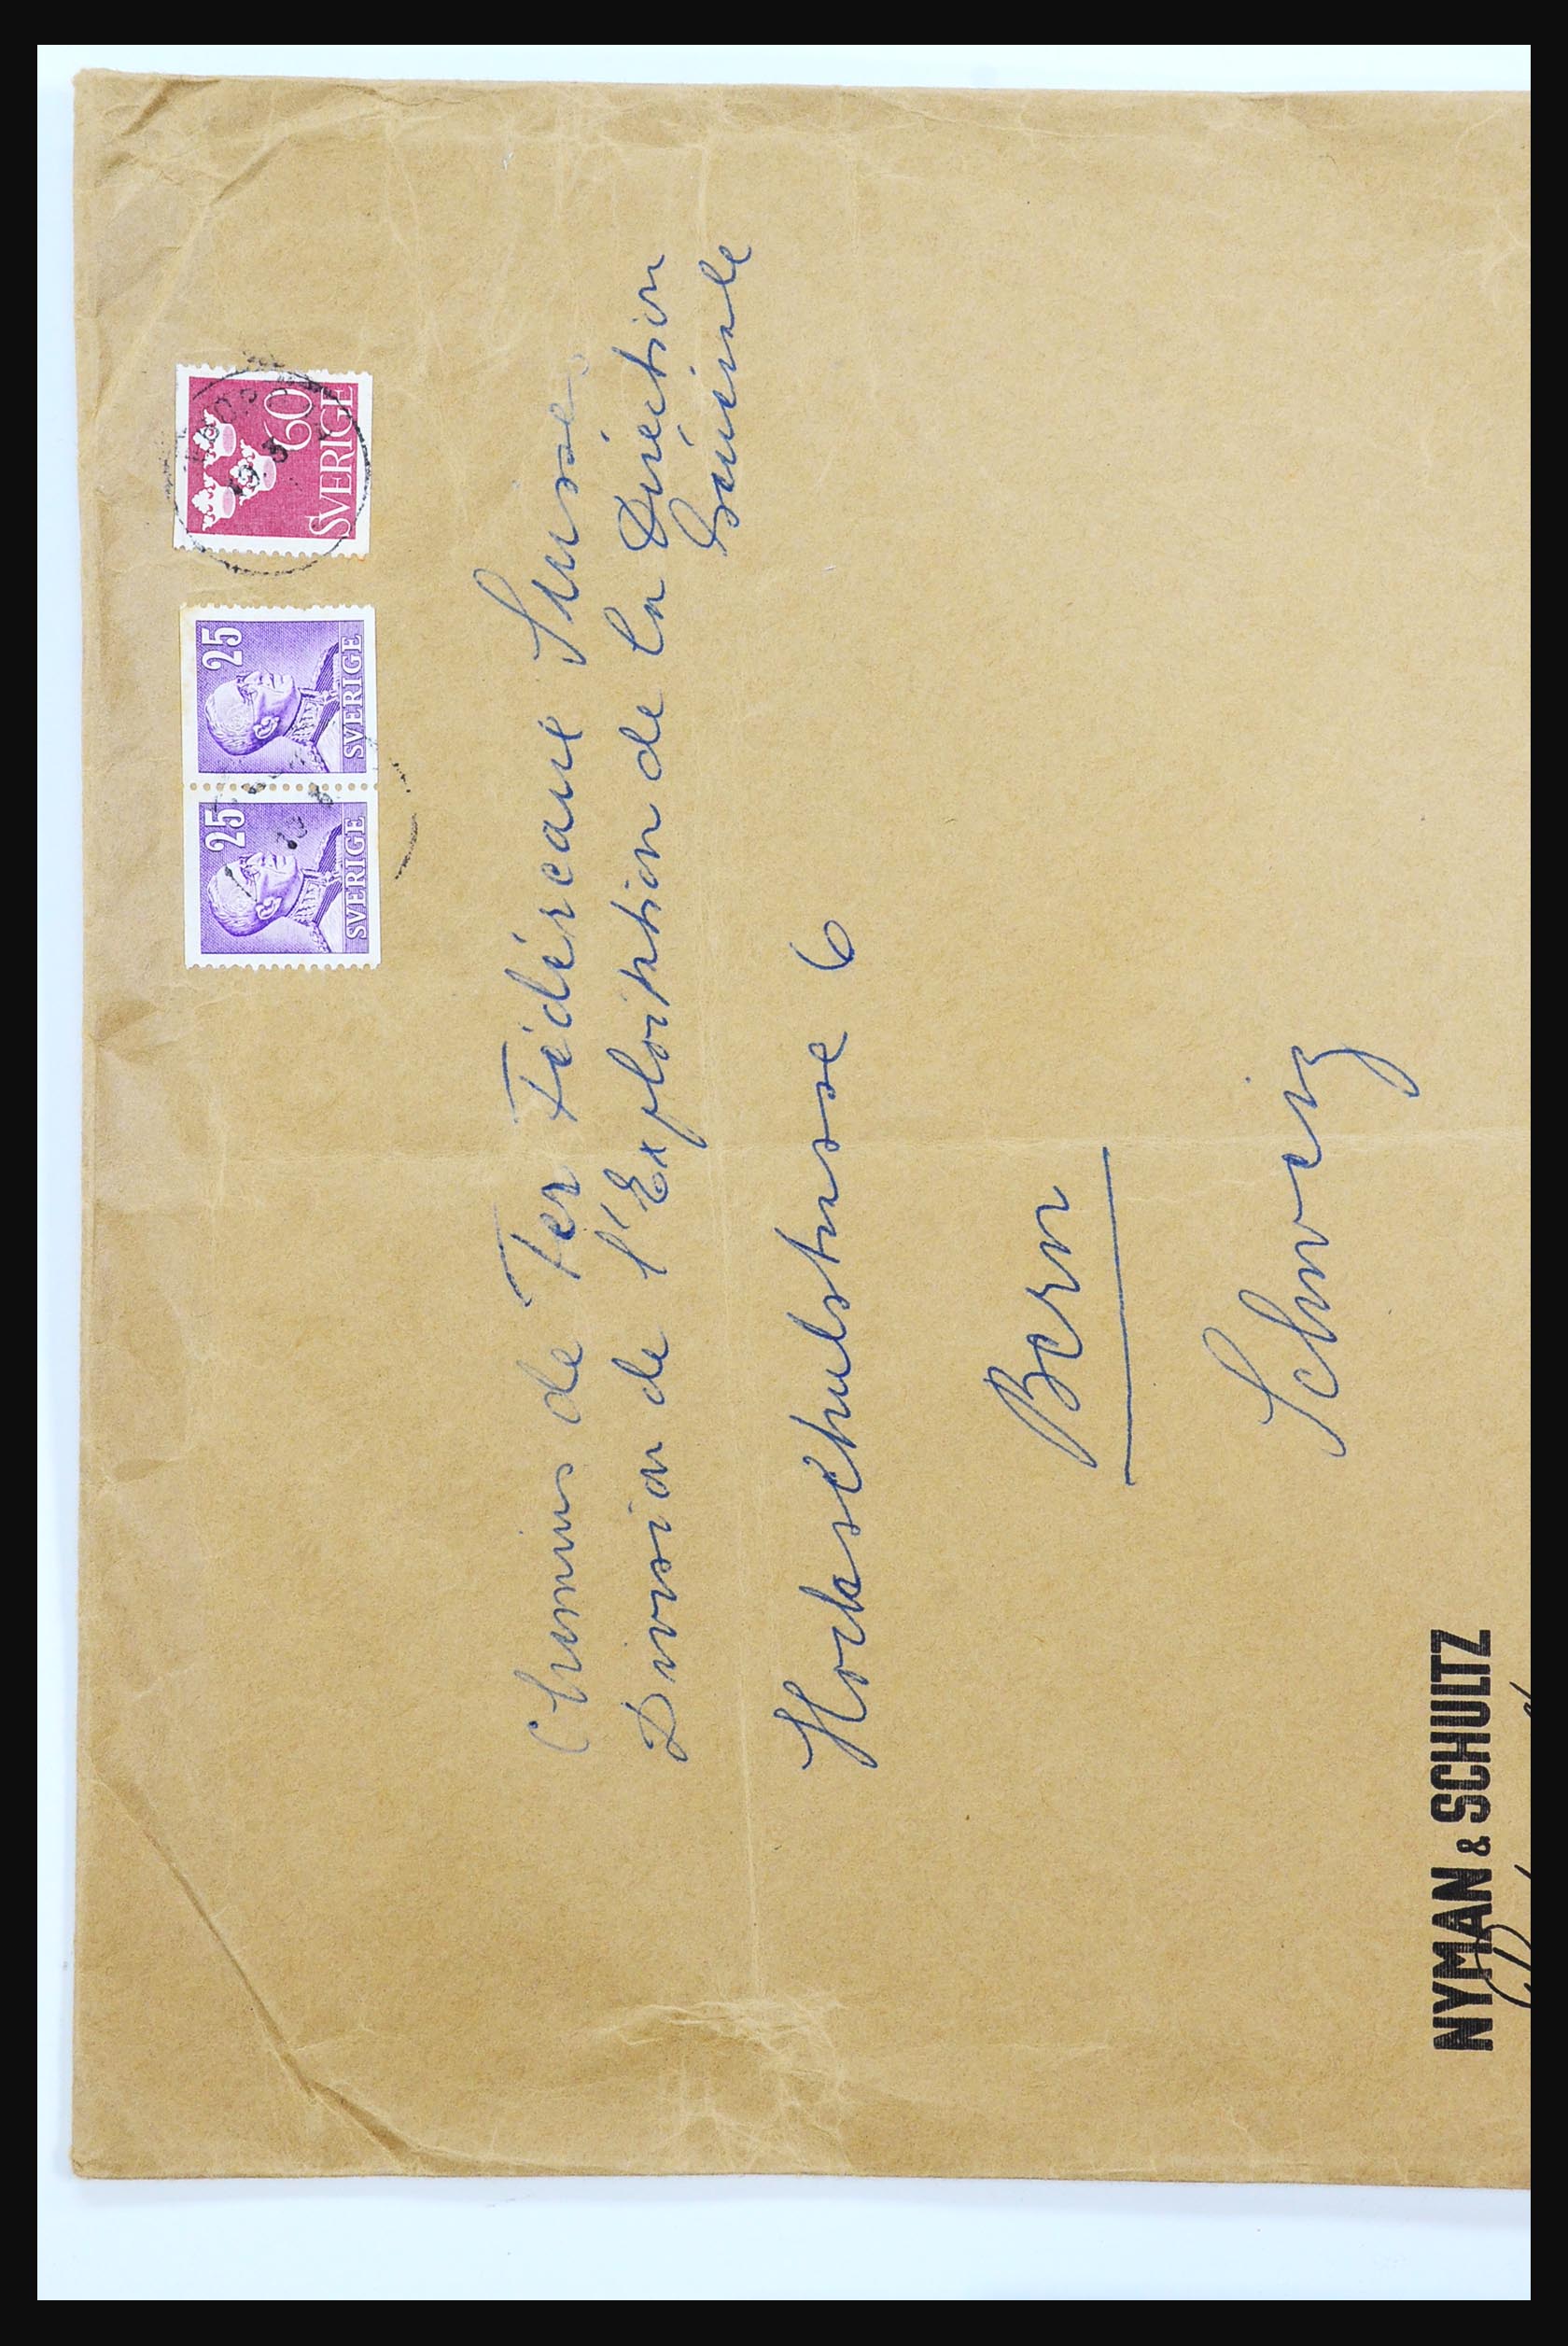 31364 082 - 31364 Sweden covers 1864-1960.